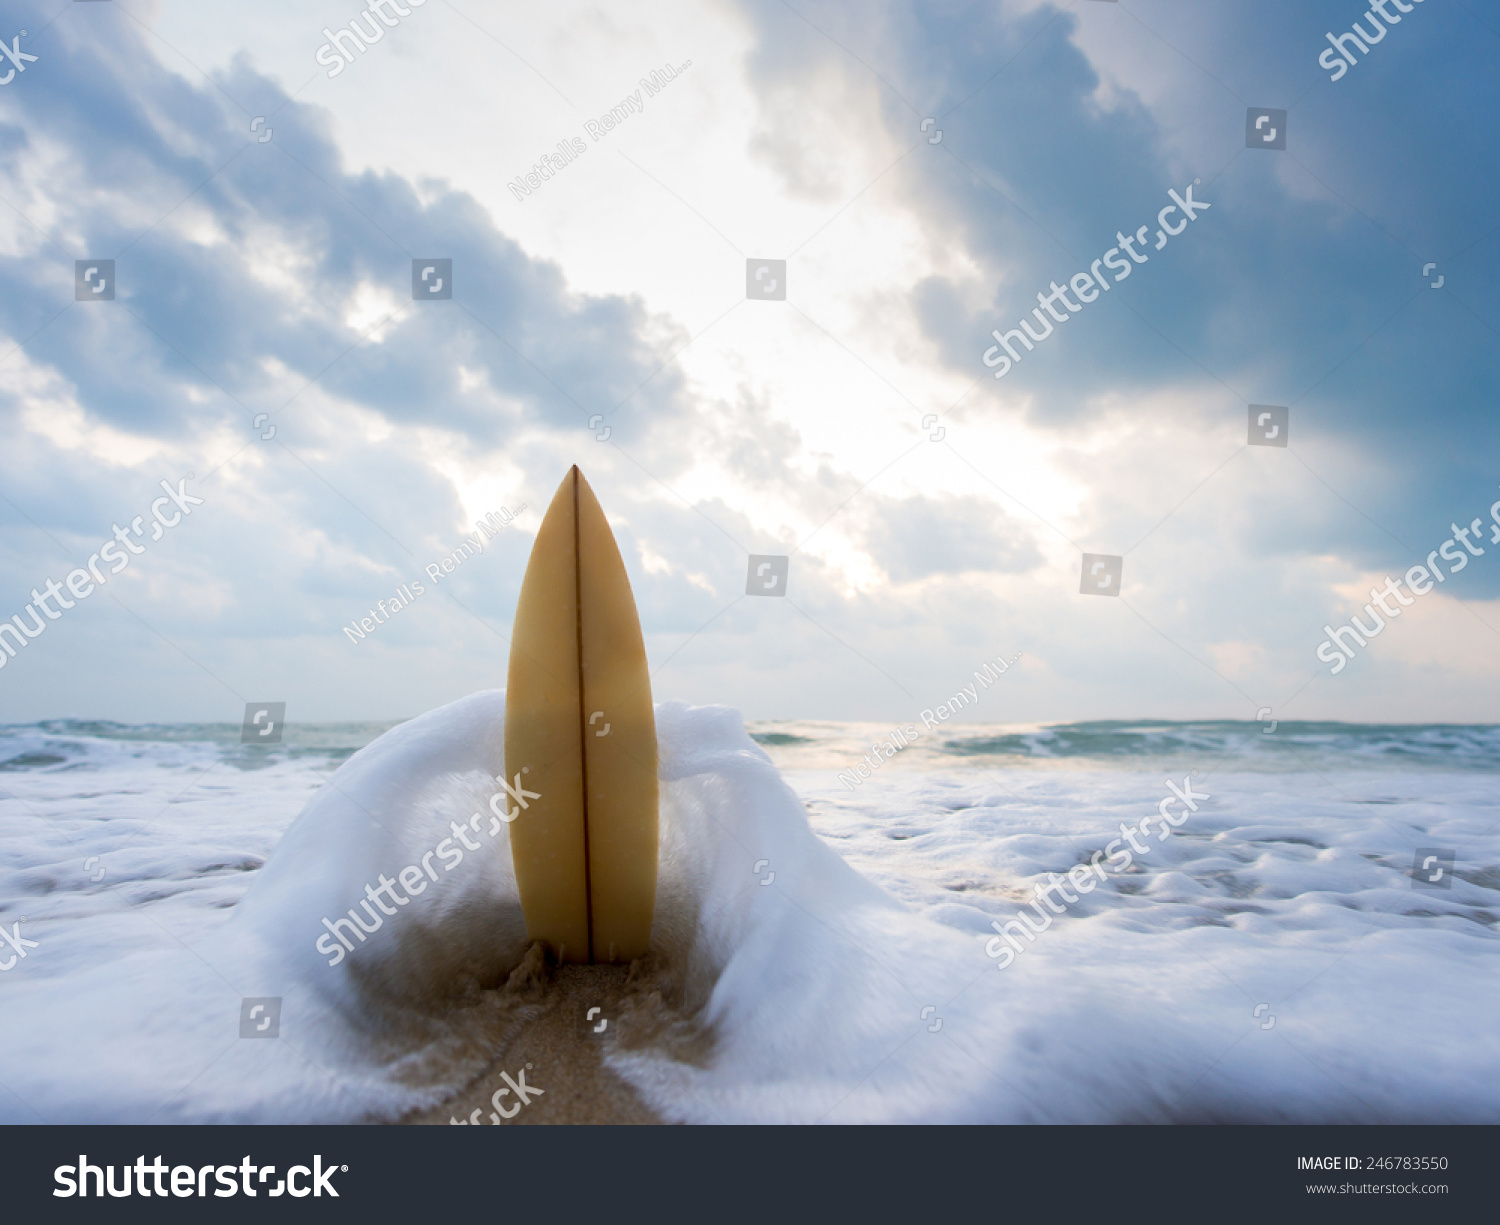 Surfboard on the beach at sunset #246783550